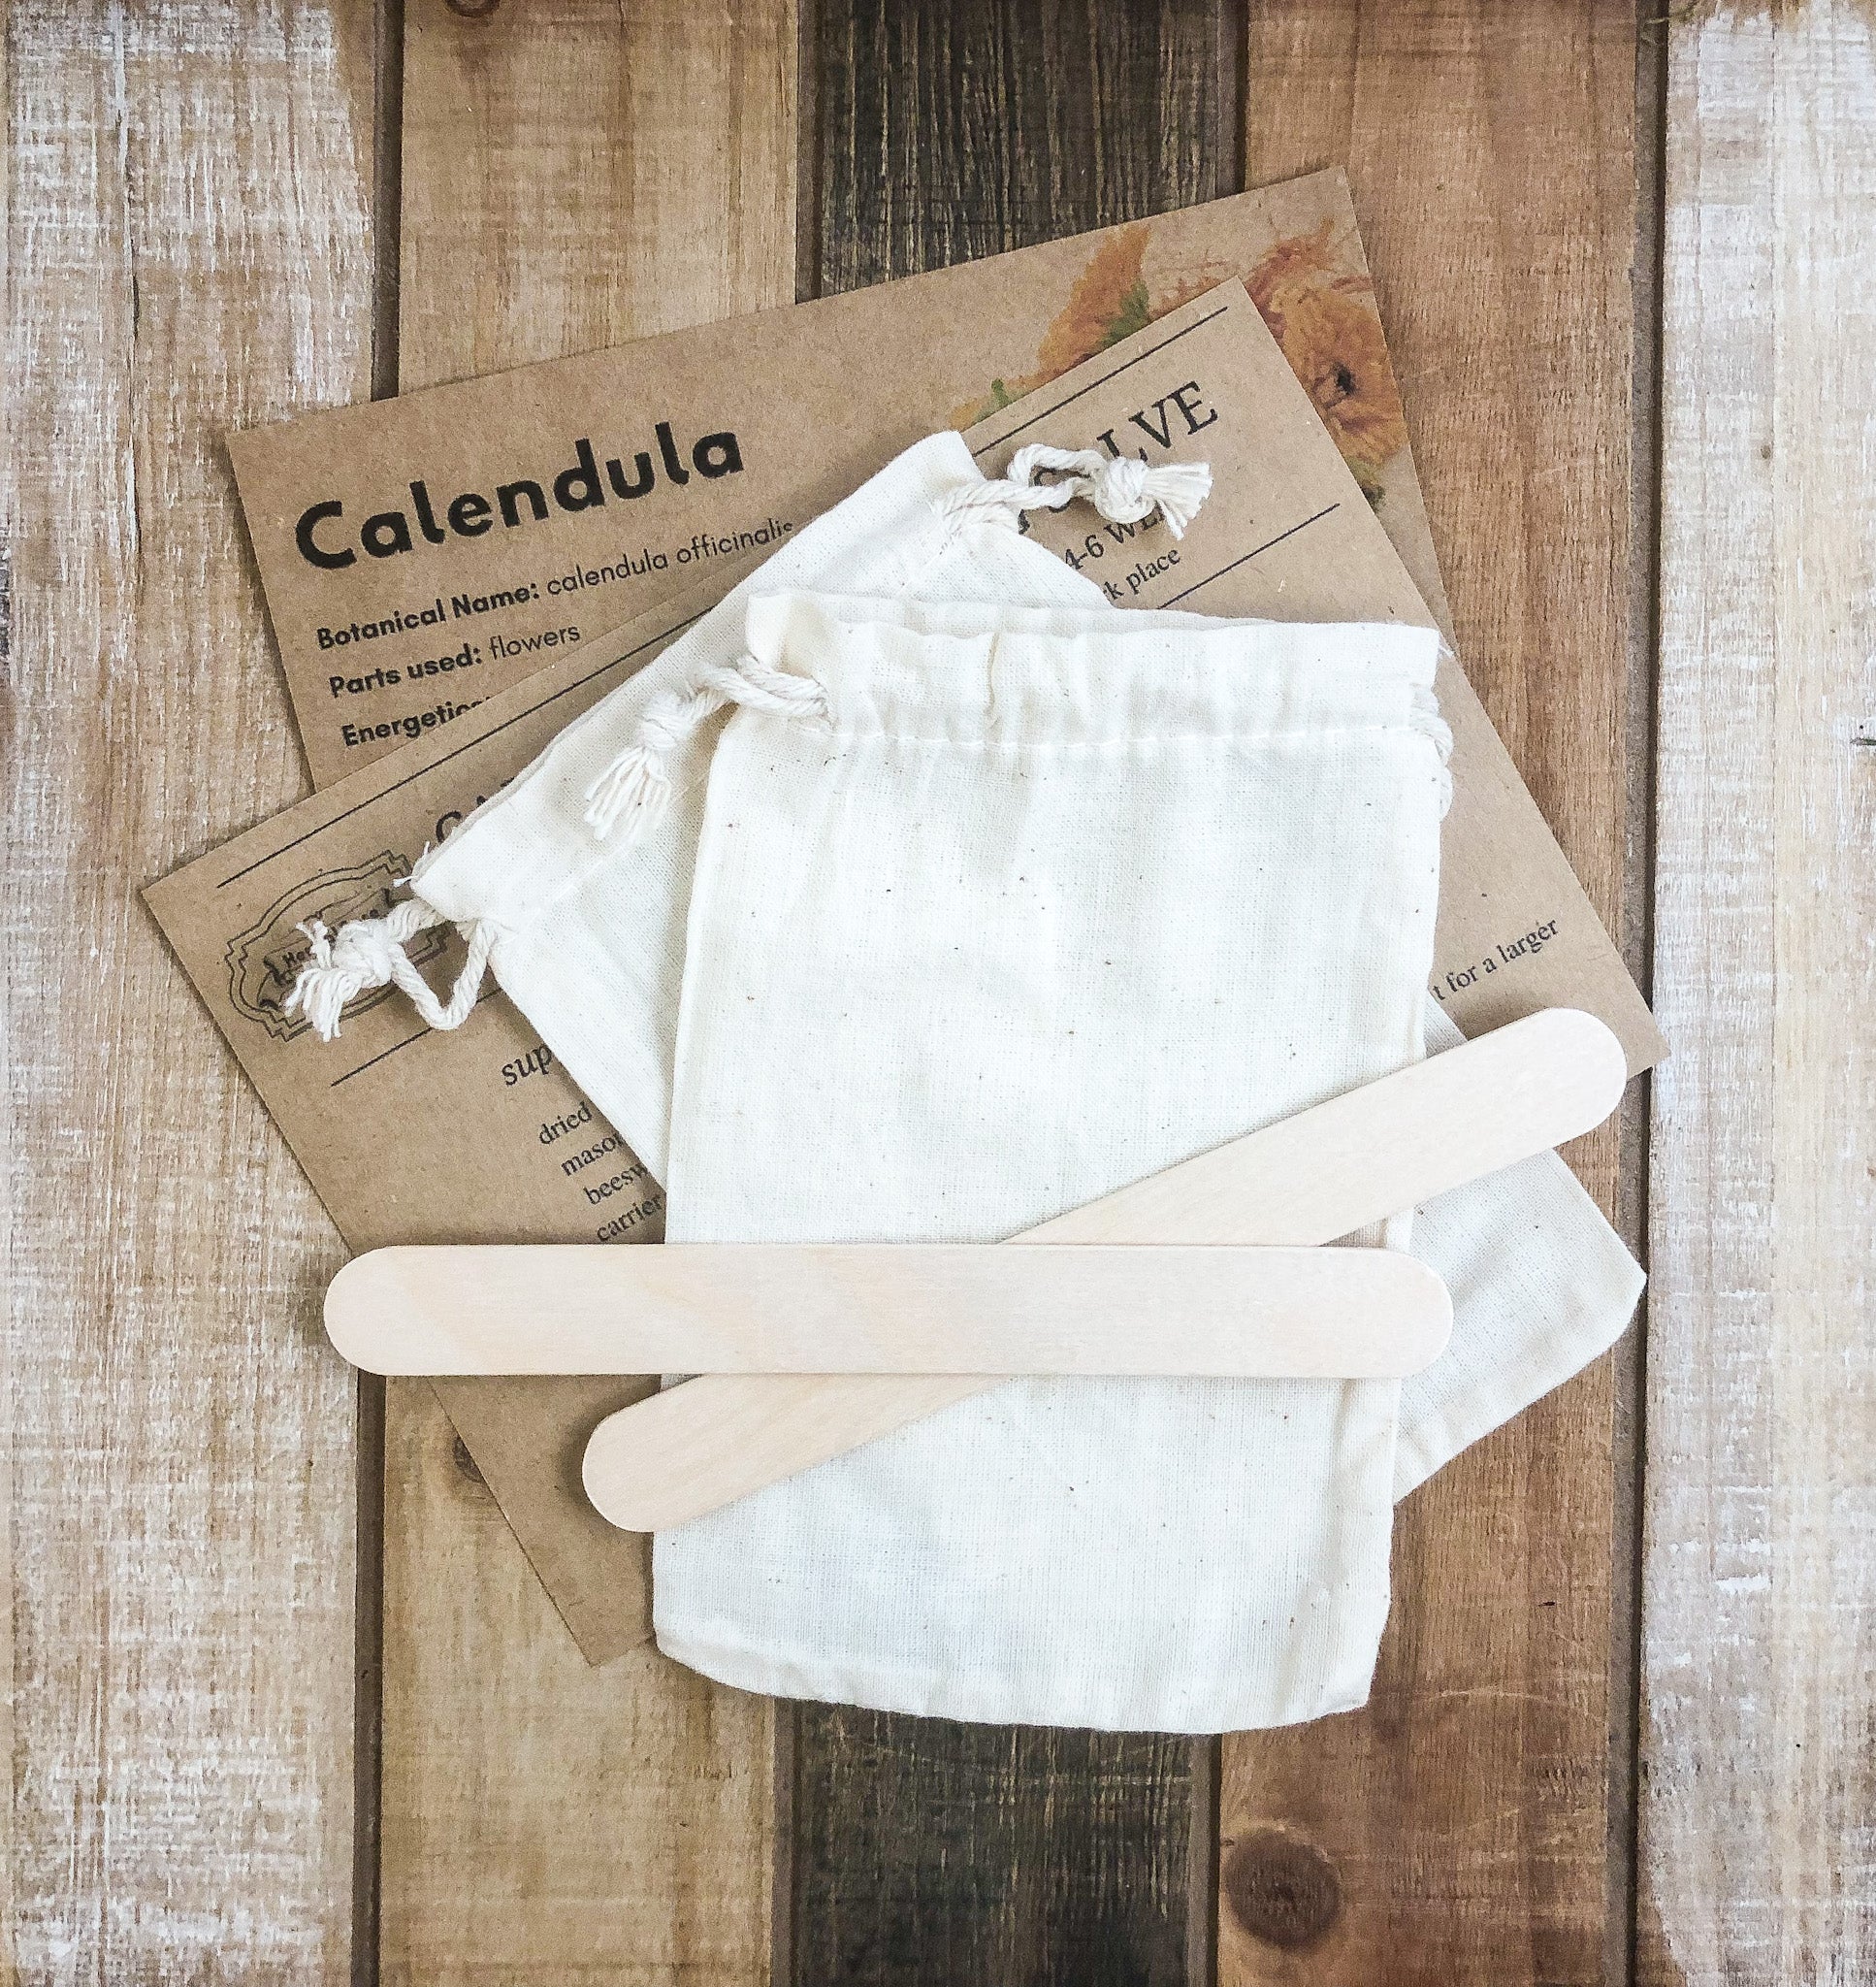 monograph card, instructions card laying on a wooden table covered partly with 2 muslin bags and 2 tongue depressors